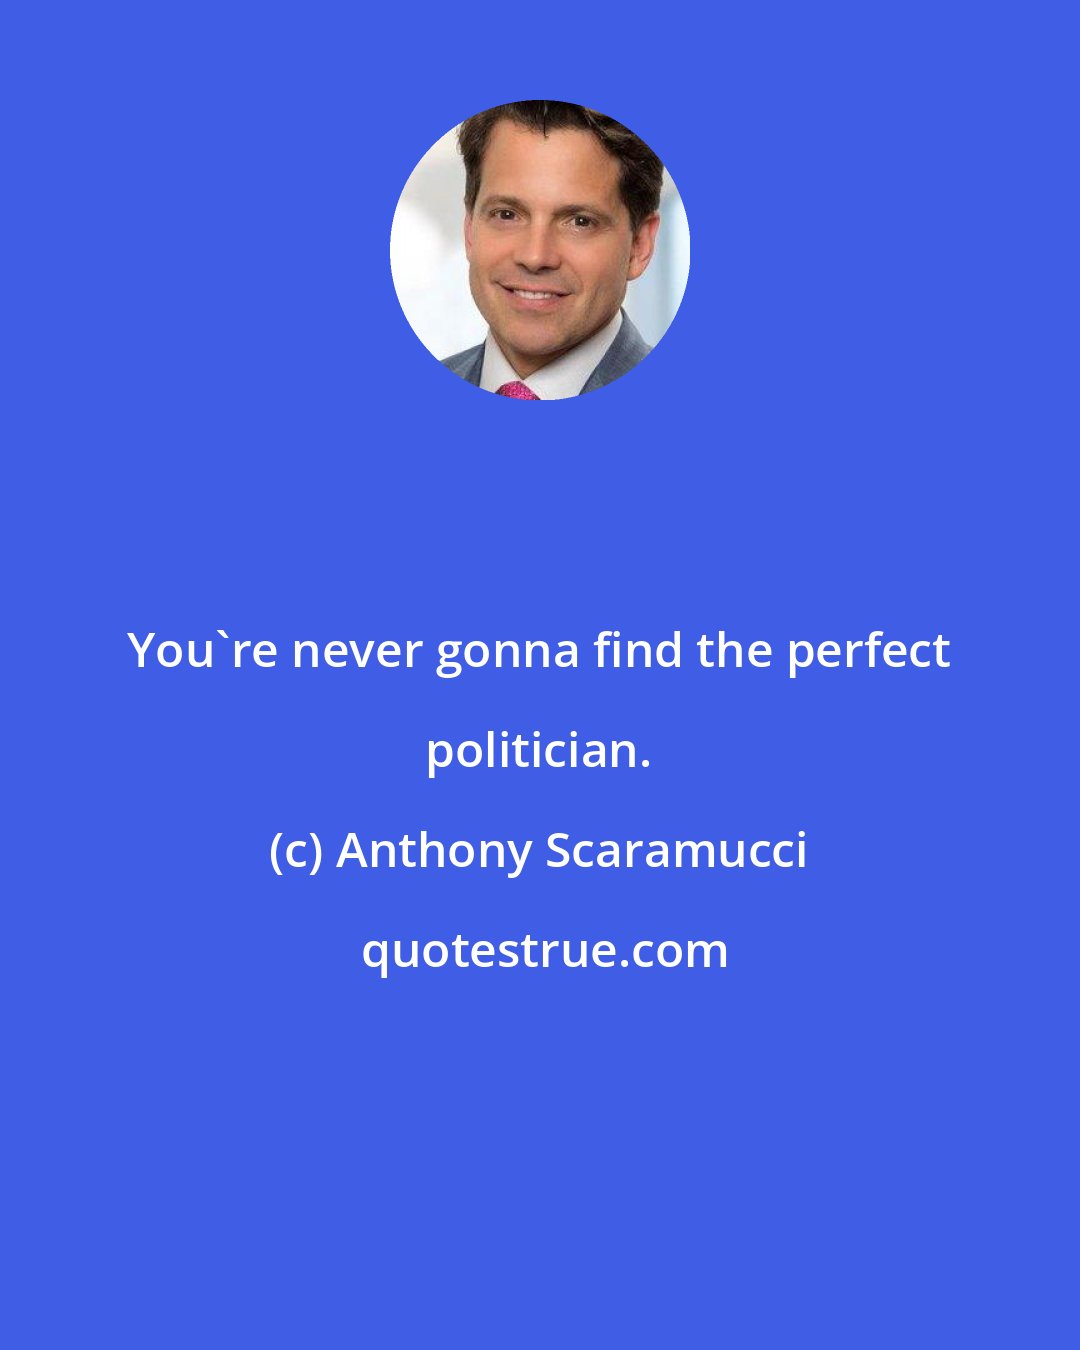 Anthony Scaramucci: You're never gonna find the perfect politician.